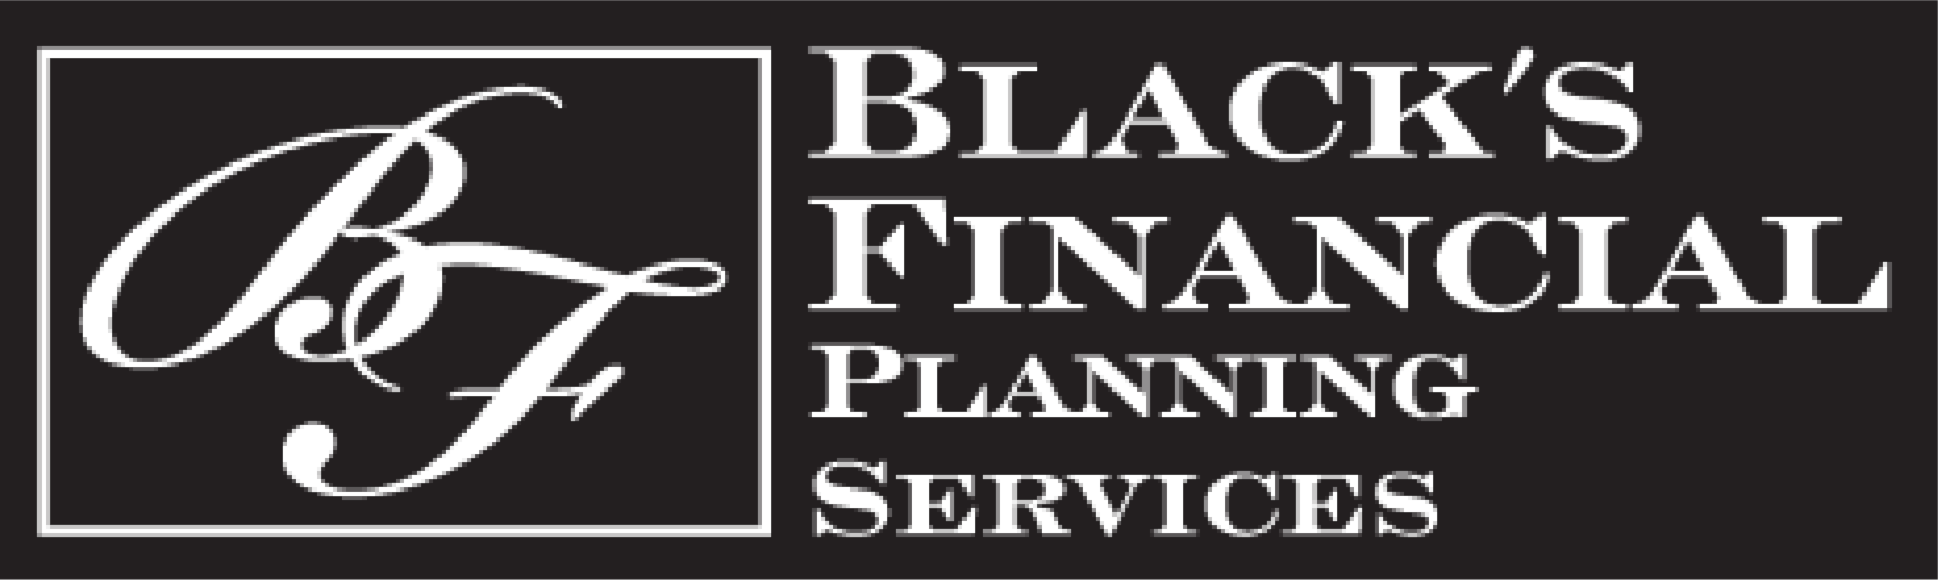 Black's Financial Planning Services